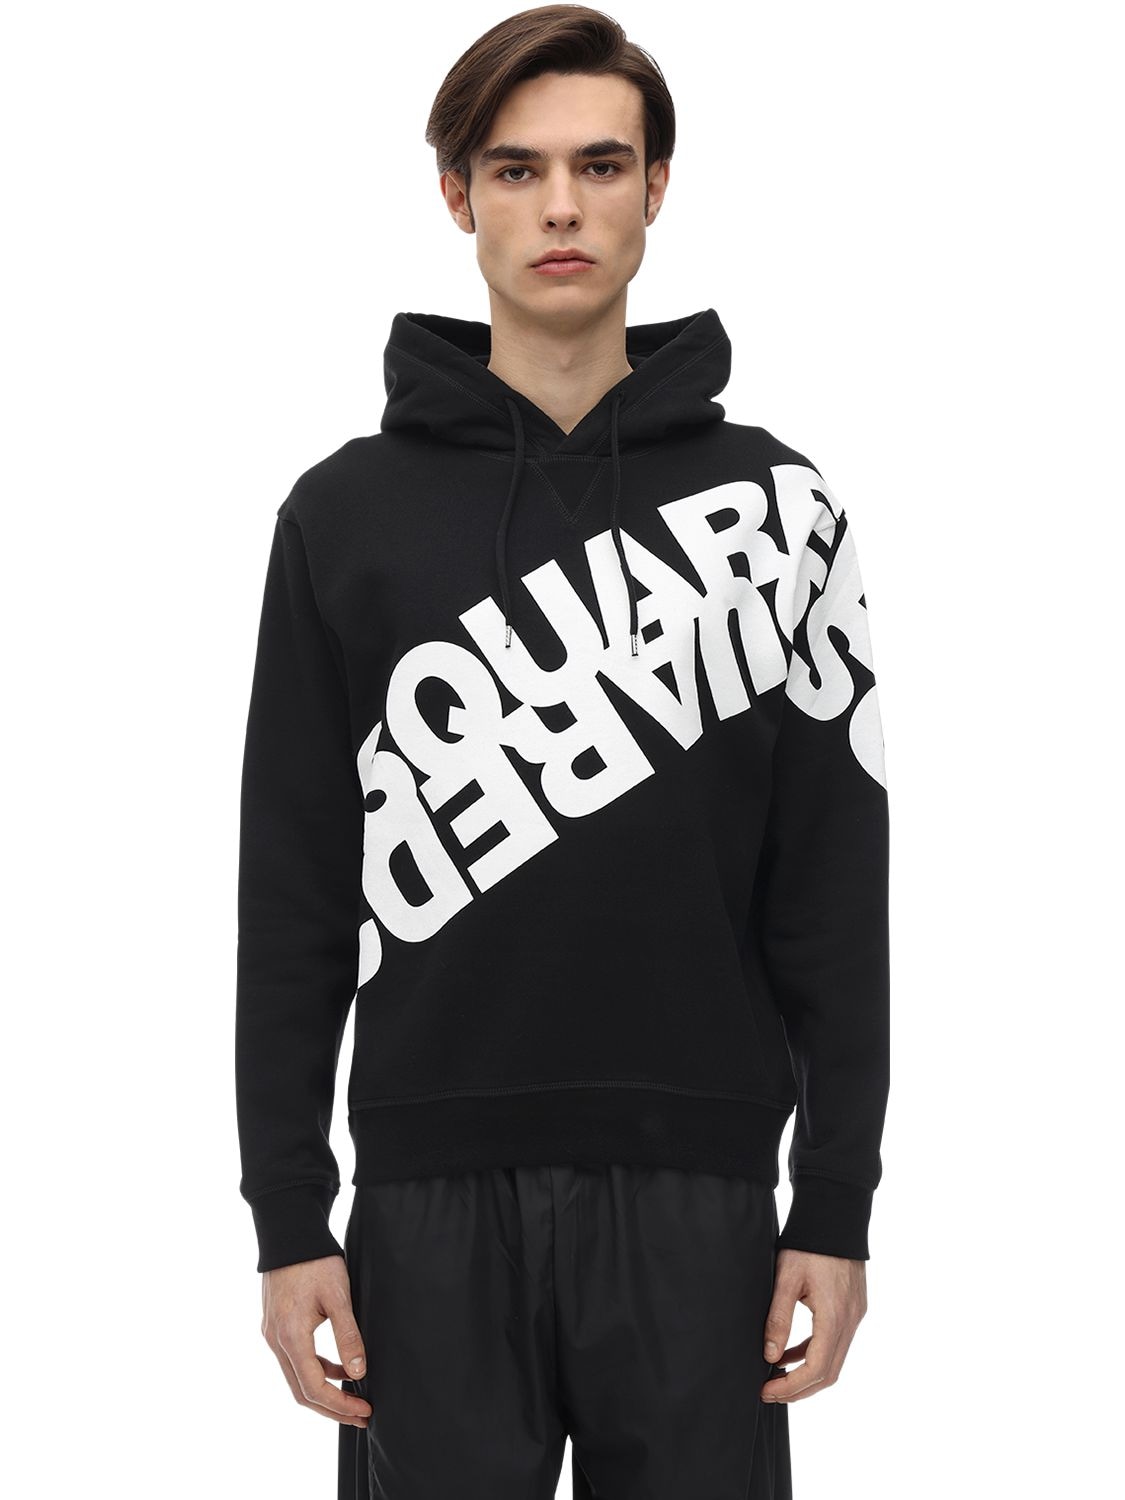 DSQUARED2 MIRROR LOGO PRINT COOL GUY JERSEY HOODIE,71IG7E075-OTAW0